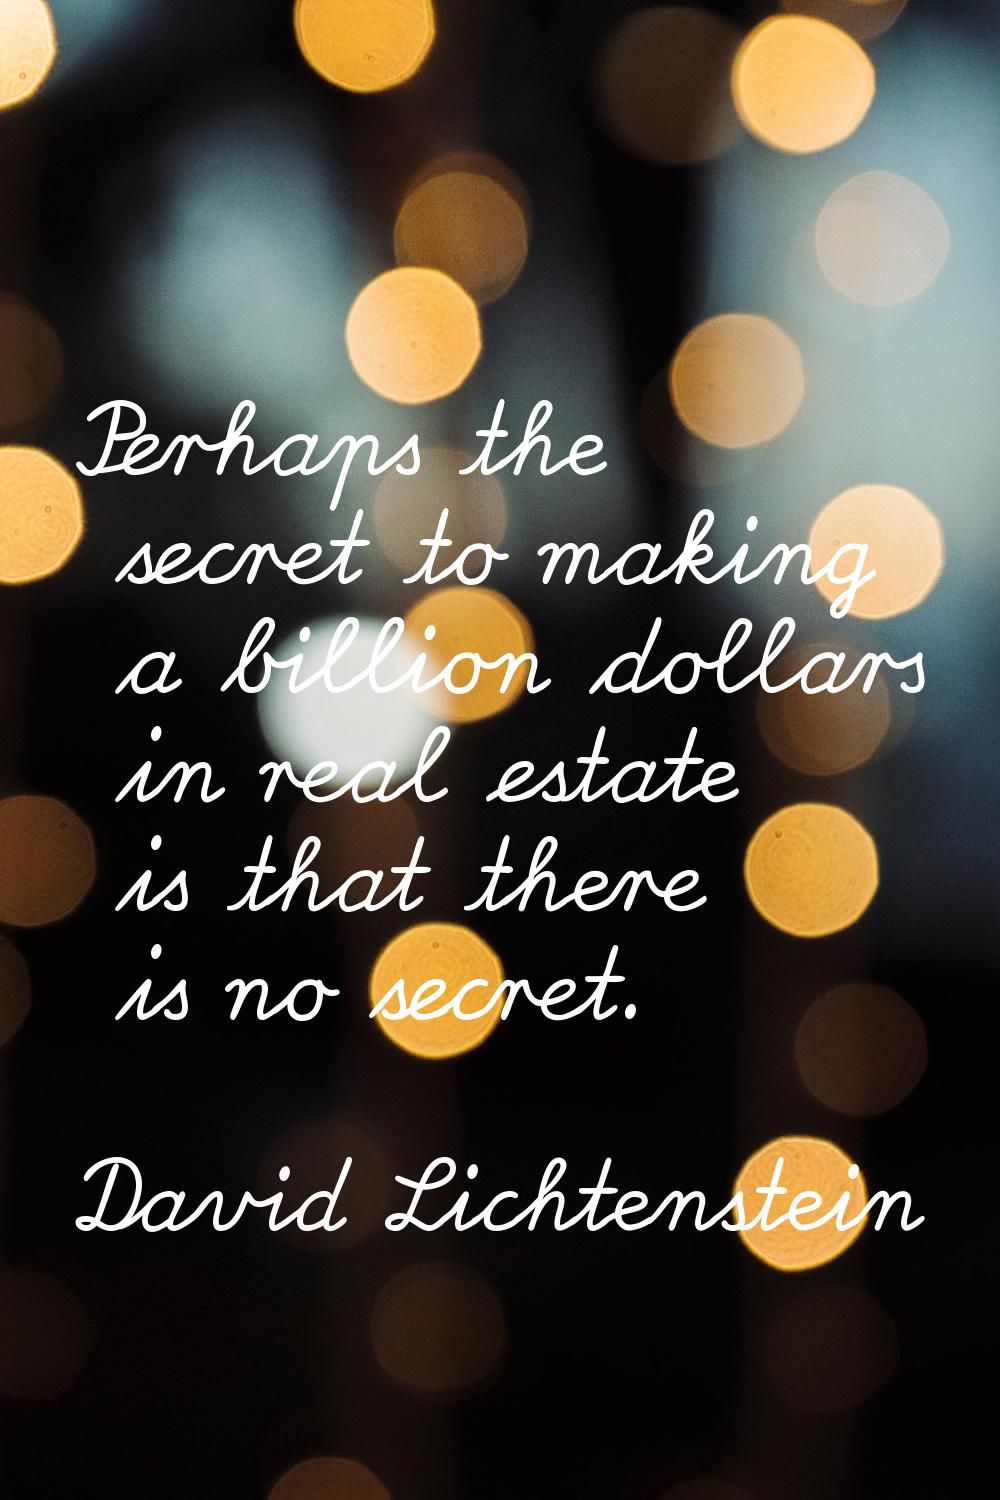 Perhaps the secret to making a billion dollars in real estate is that there is no secret.